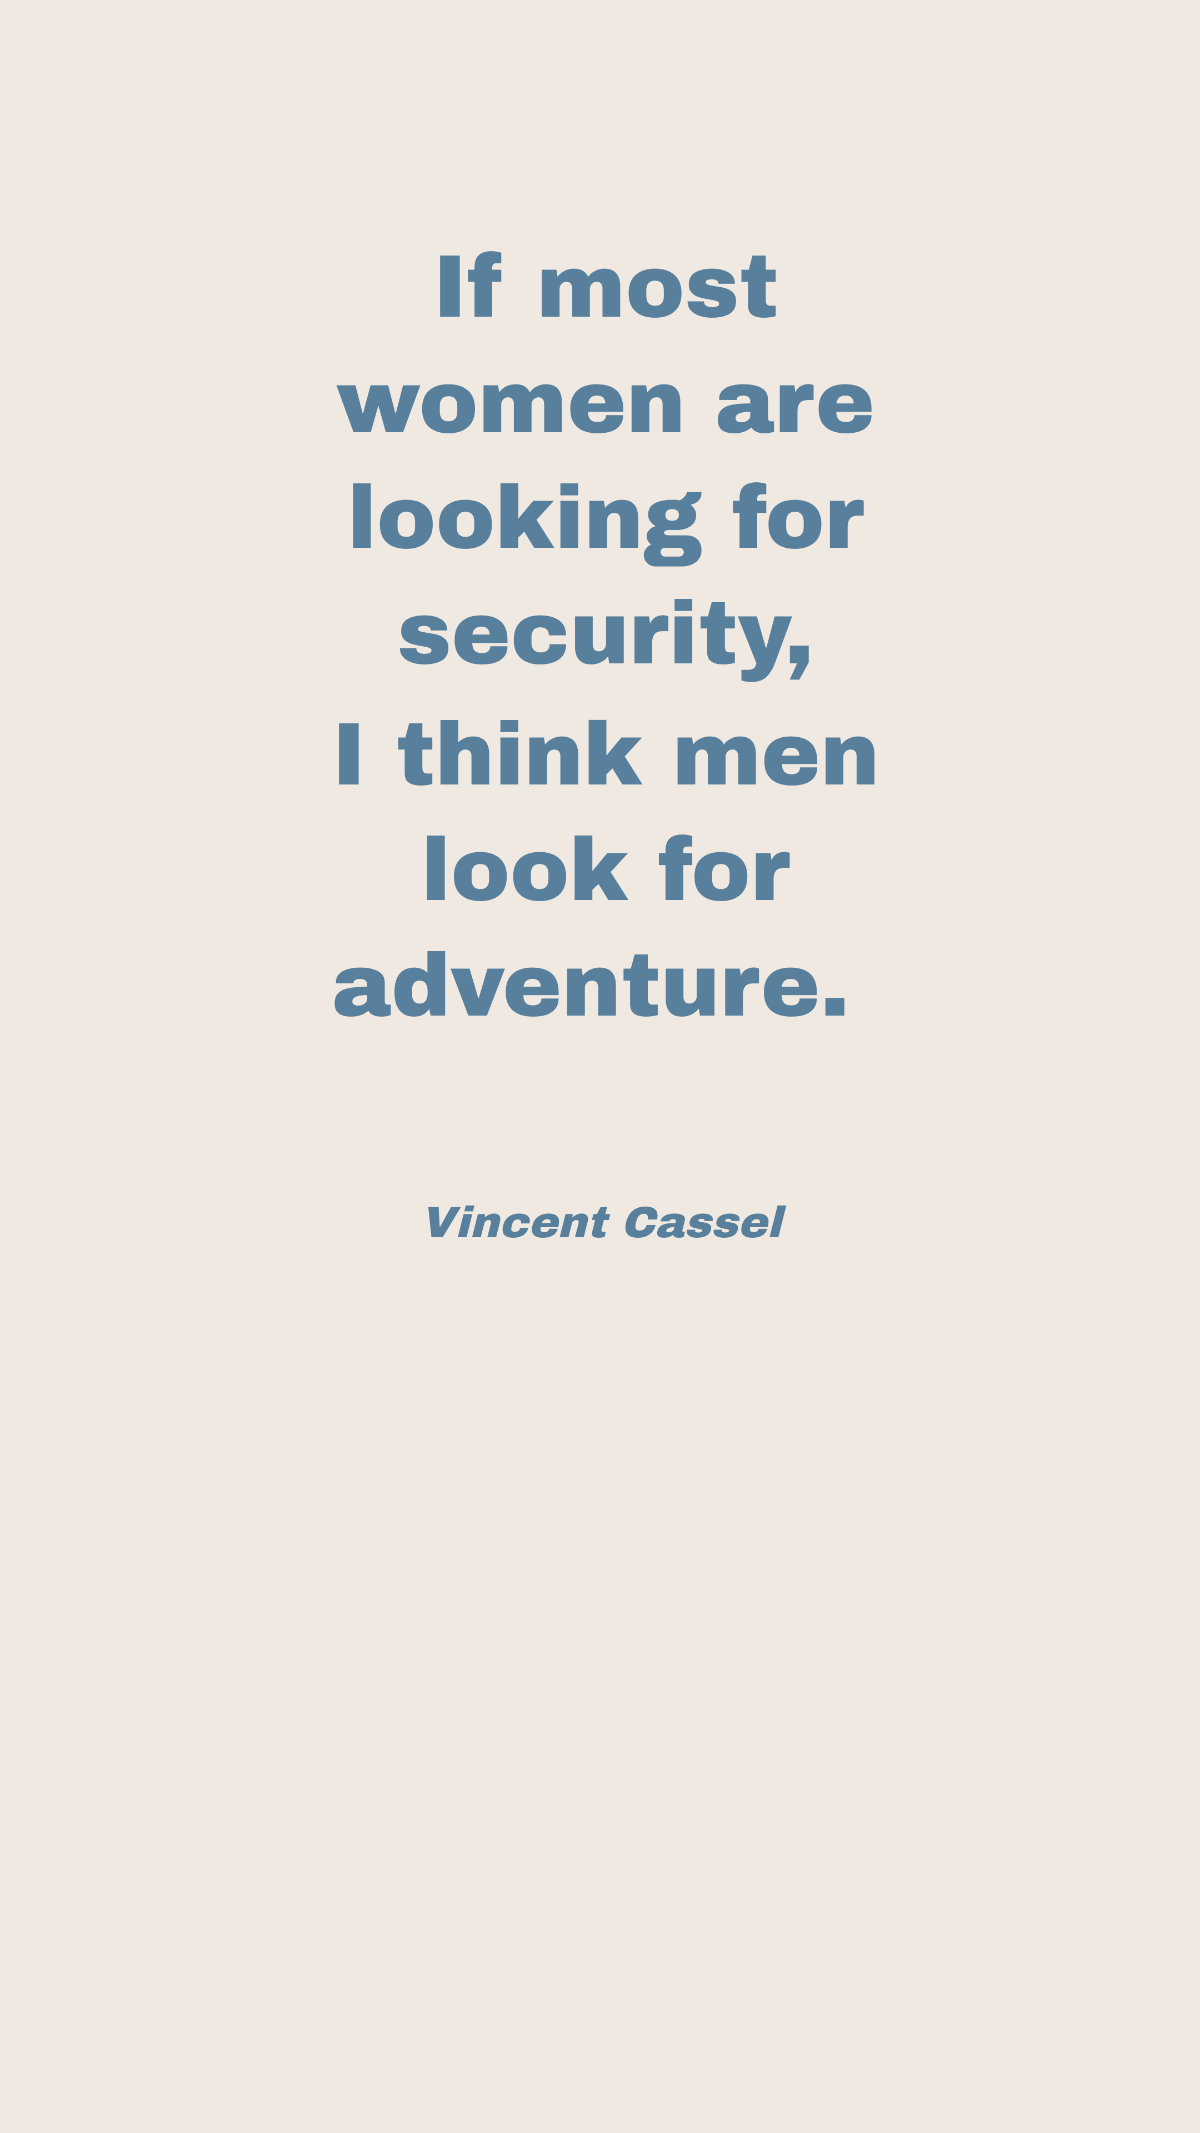 Vincent Cassel - If most women are looking for security, I think men look for adventure. Template